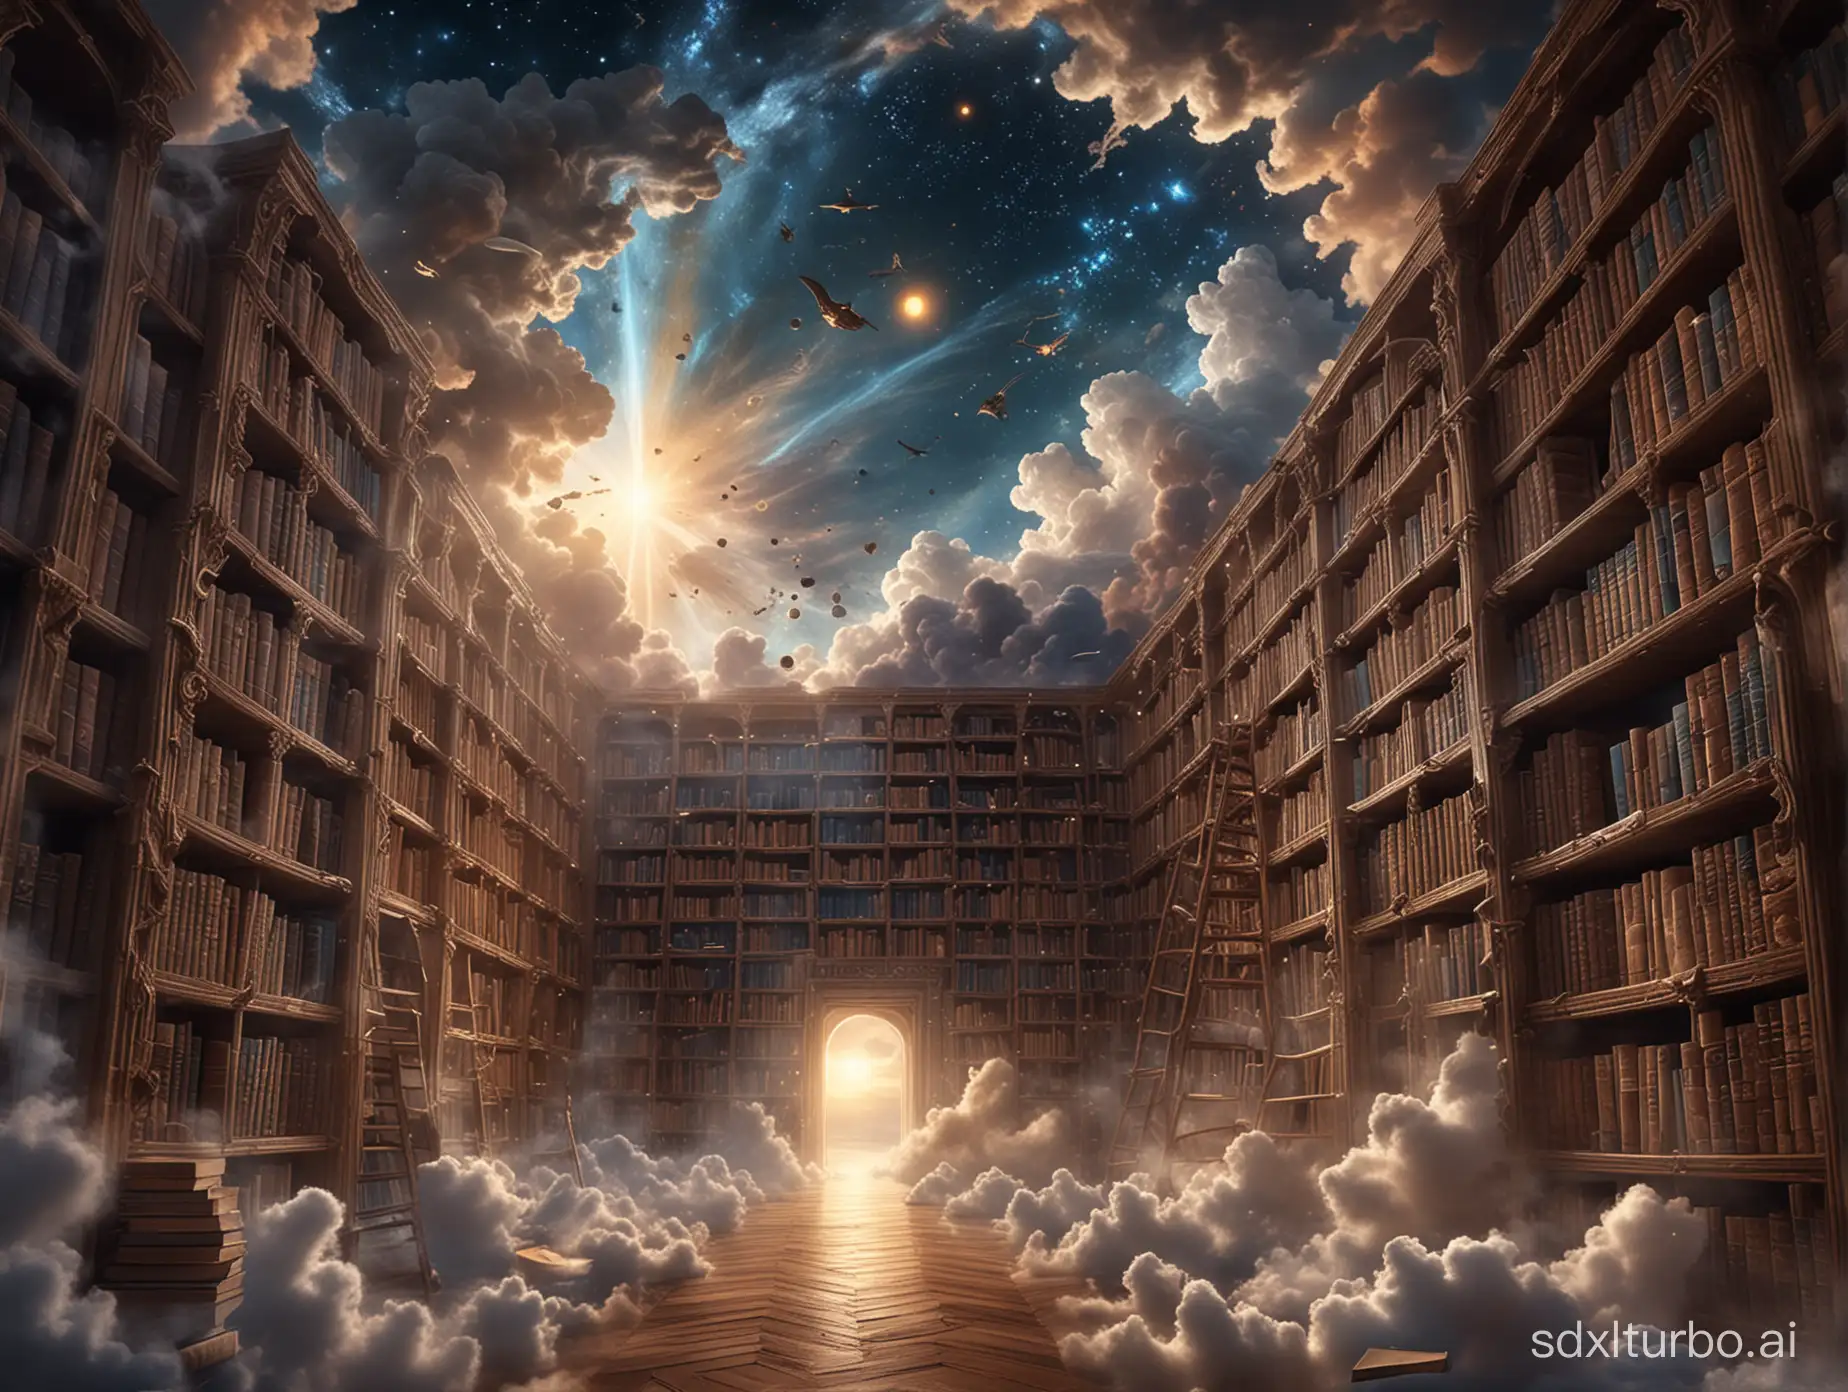 Create a dreamlike scene of a celestial library hidden within the clouds, where towering bookshelves stretch endlessly into the heavens, filled with volumes of knowledge from across time and space, guarded by wise celestial beings.